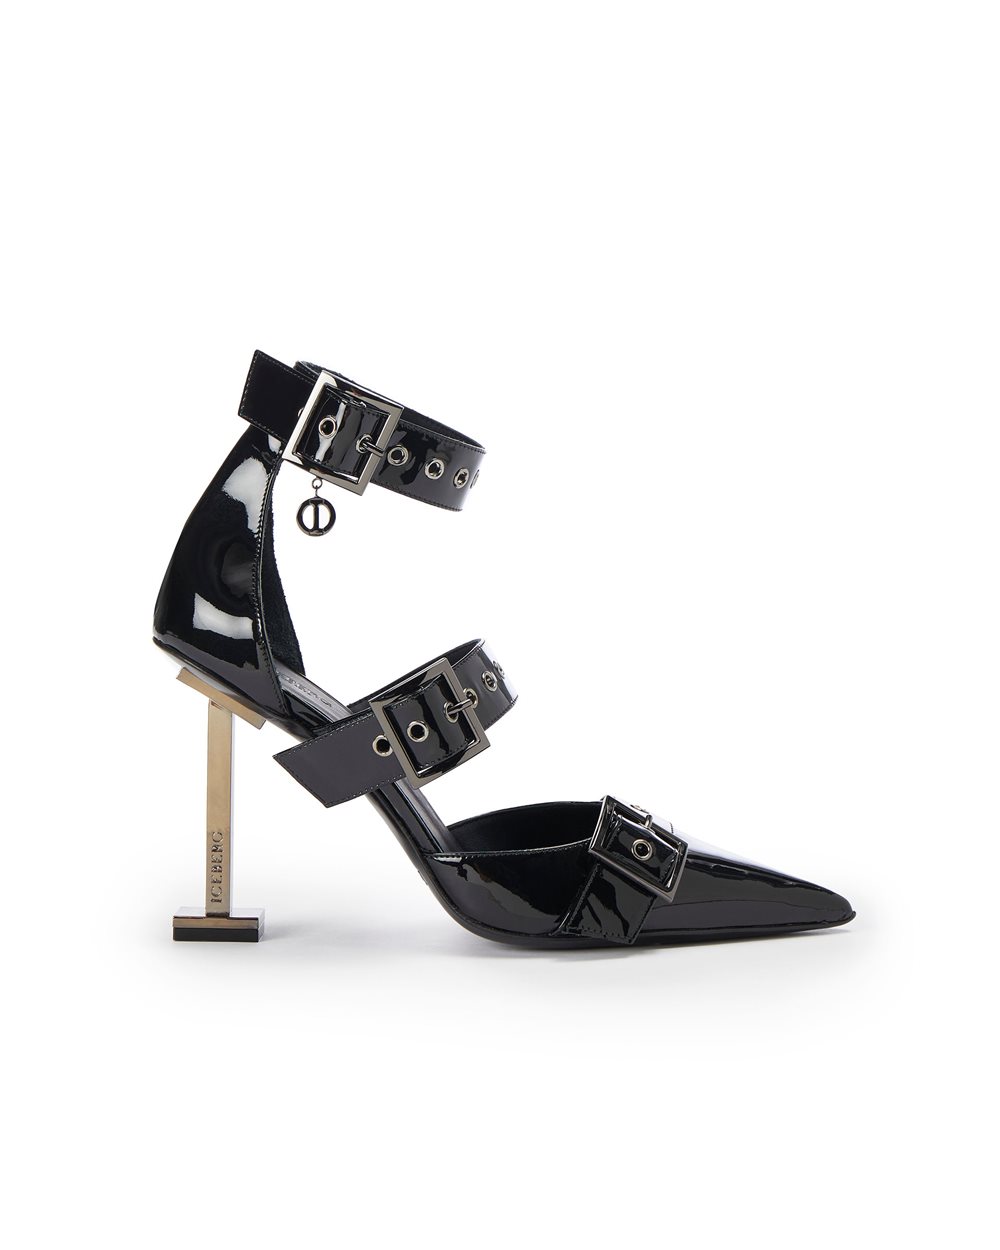 Black pumps with iconic heel | Iceberg - Official Website